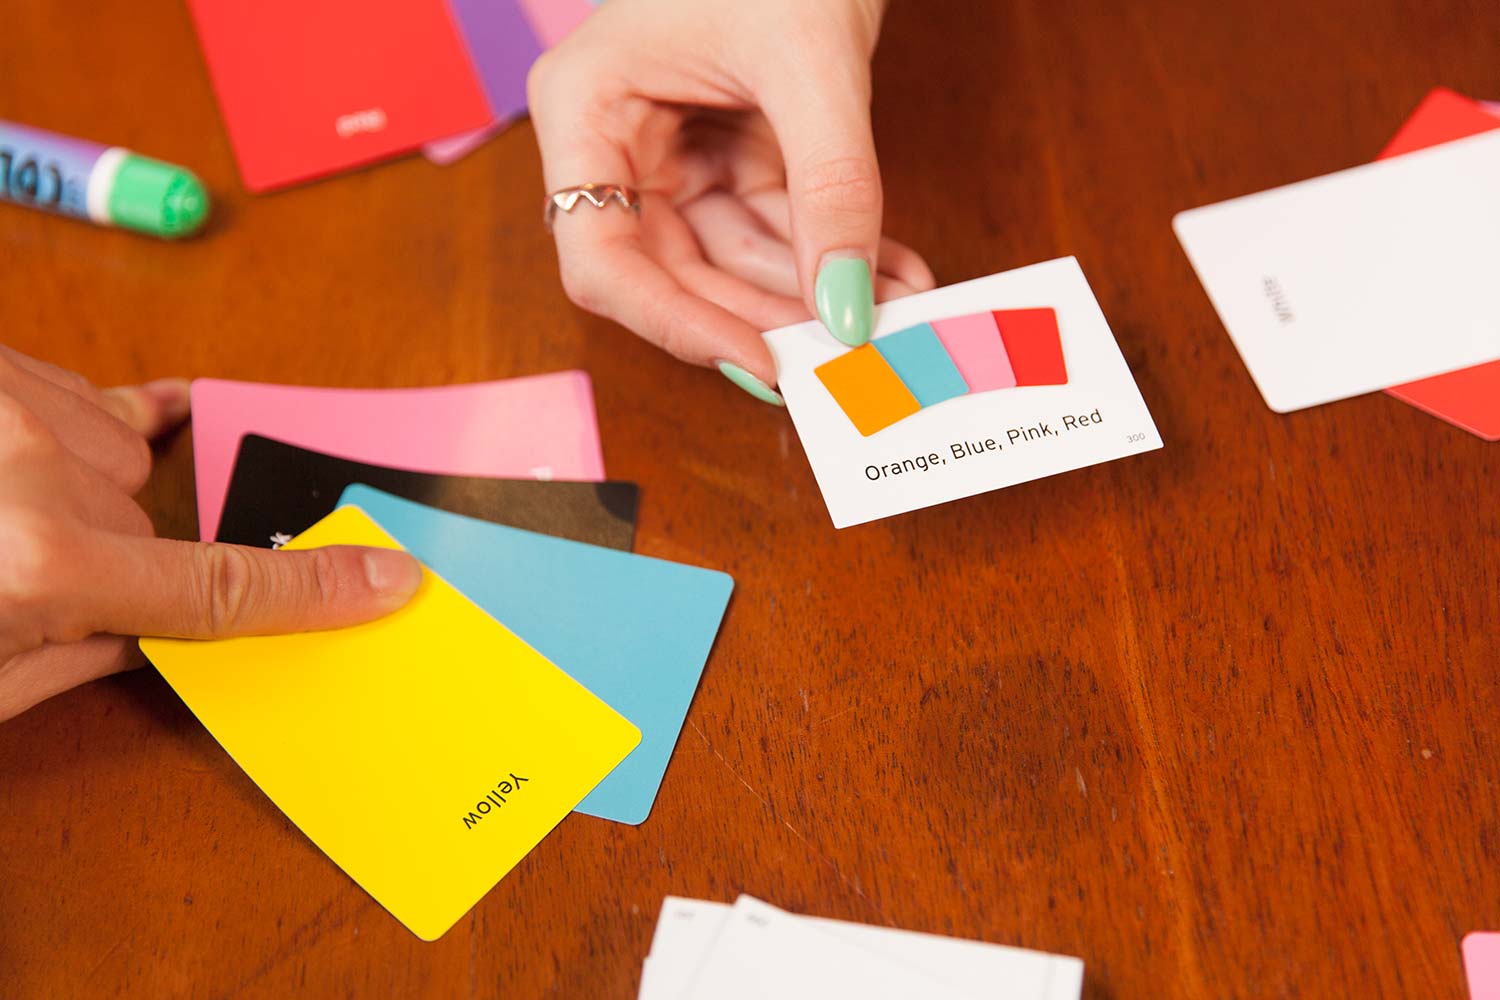 A person laying down an options card, while another lays down several colour cards